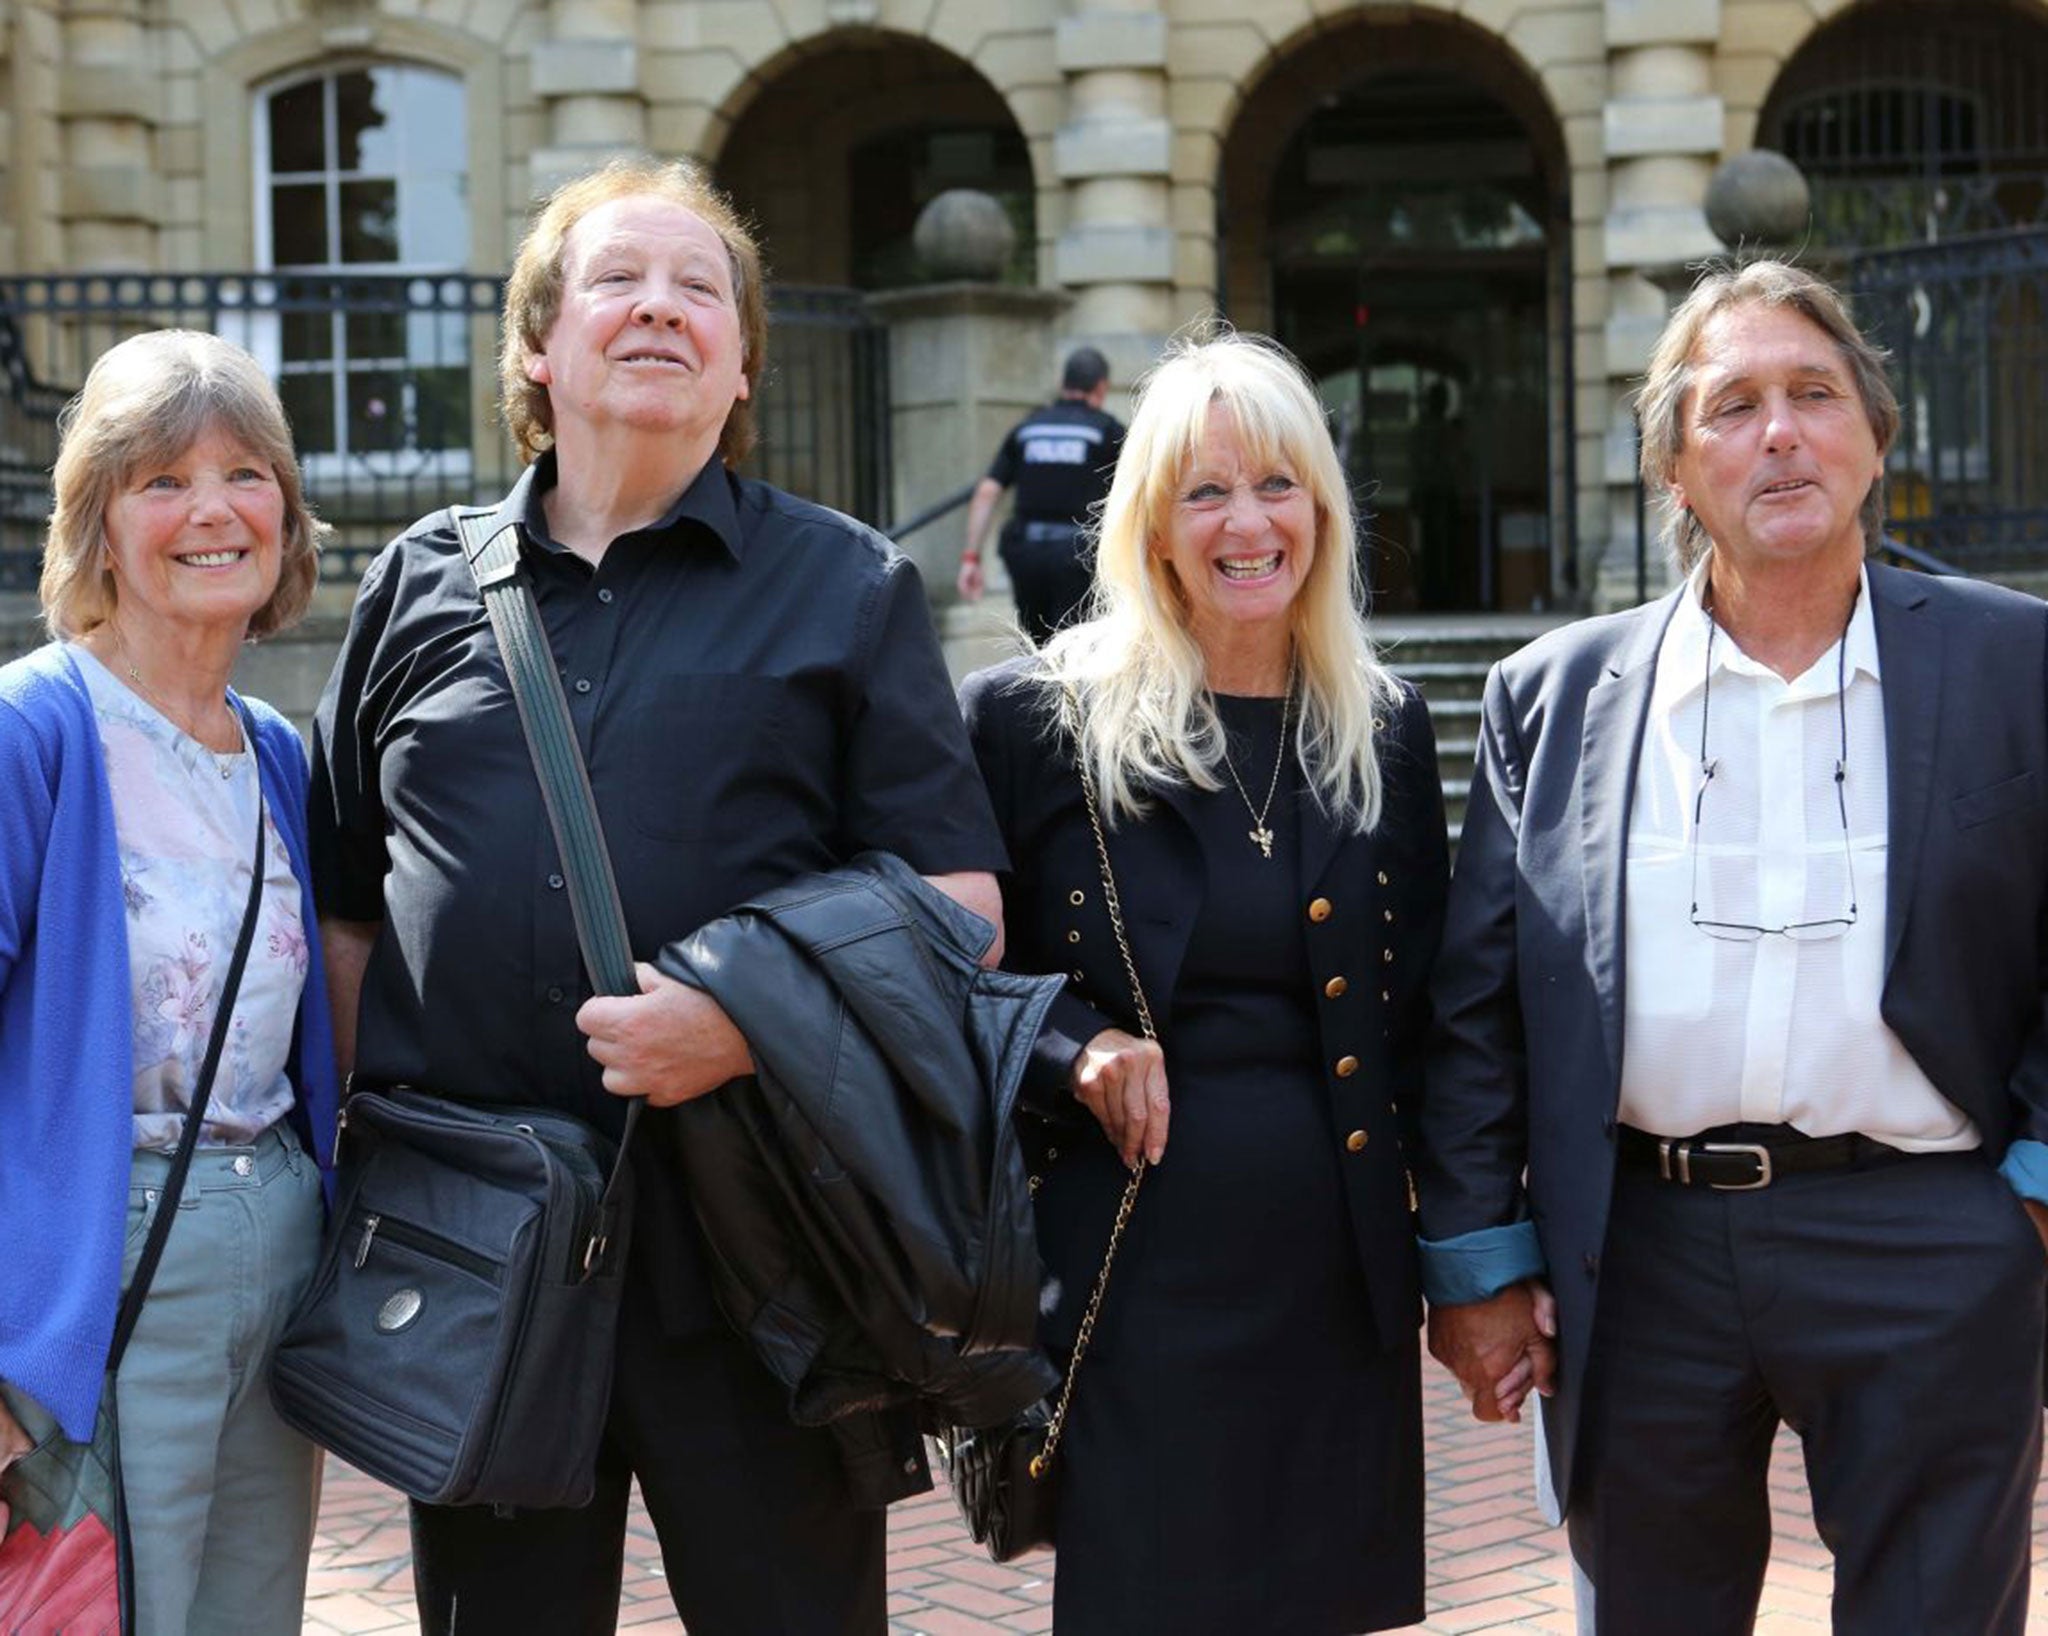 Richard Westwood (second left) and Leonard 'Chip' Hawkes, with their wives, outside Reading Crown Court after their acquittal